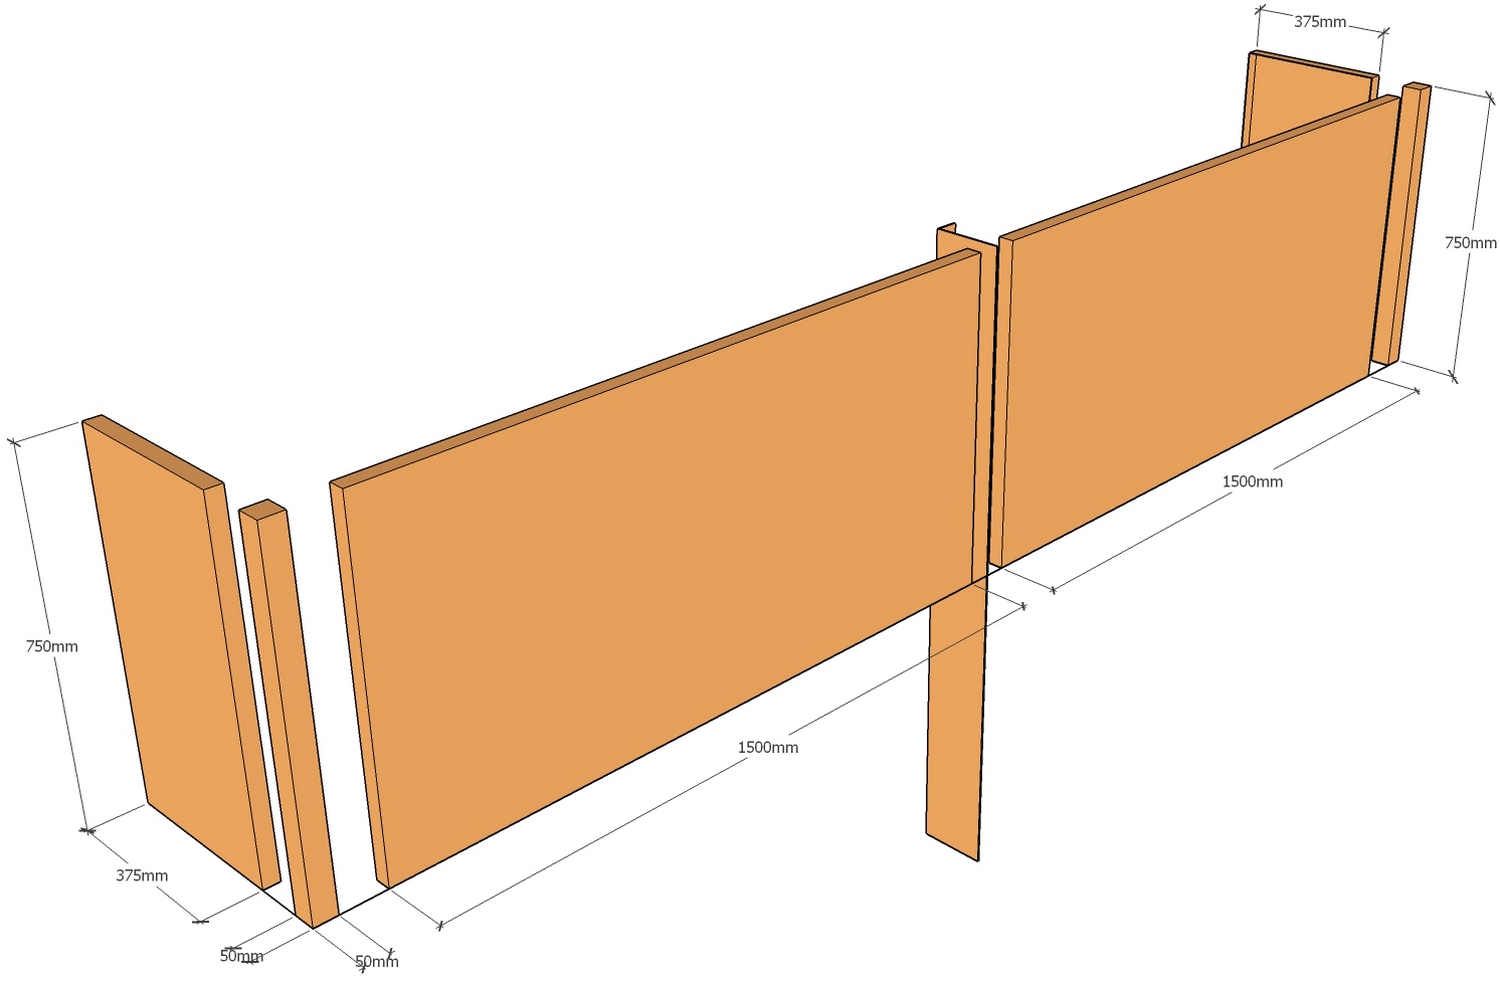 corten backless planter 3100mm x 425mm x 750mm layout drawing